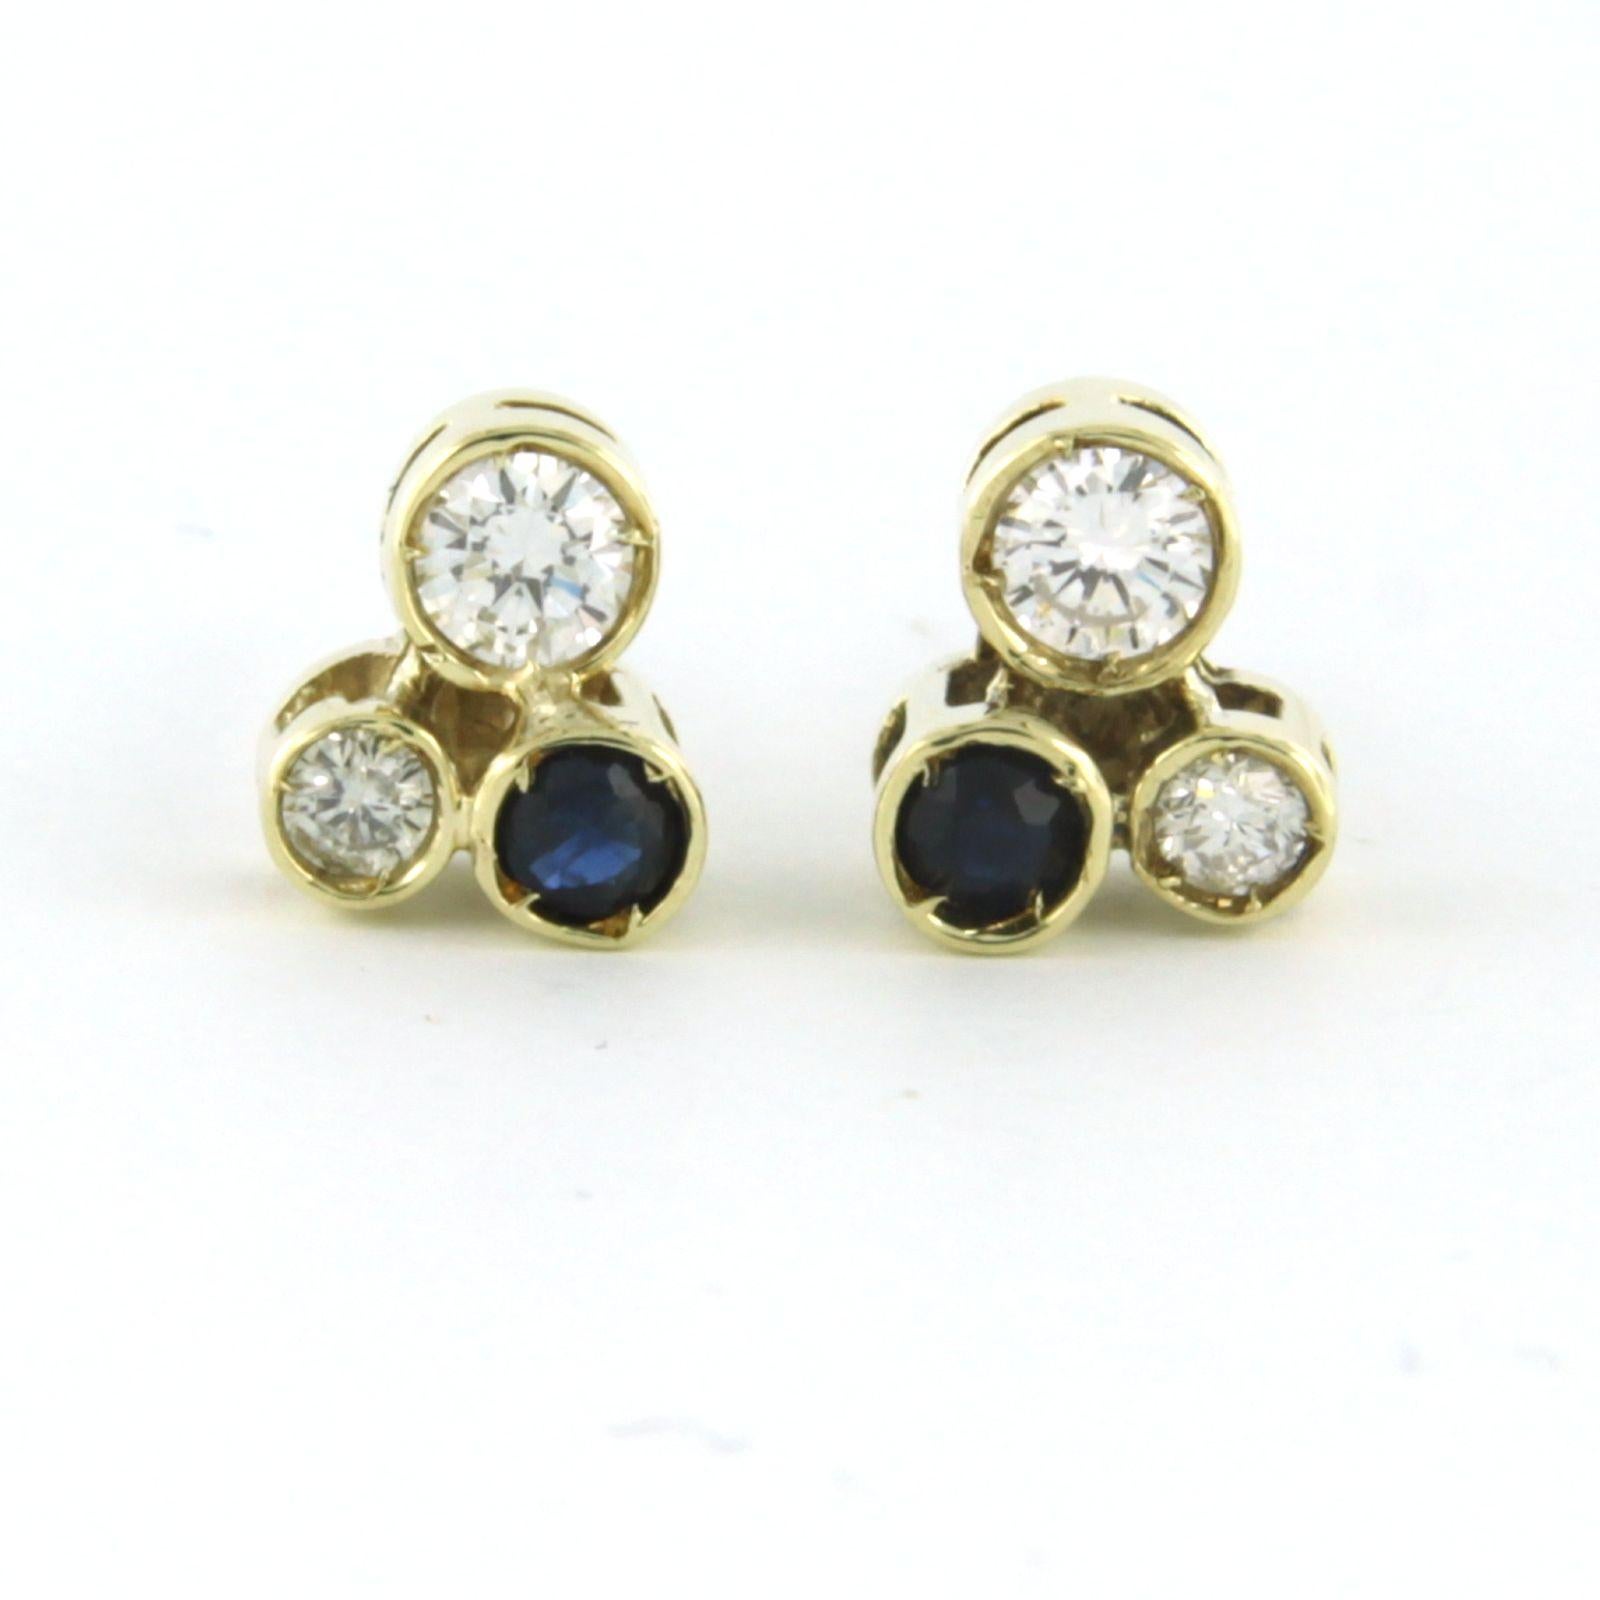 Earrings stud set with sapphire and diamonds 14k yellow gold